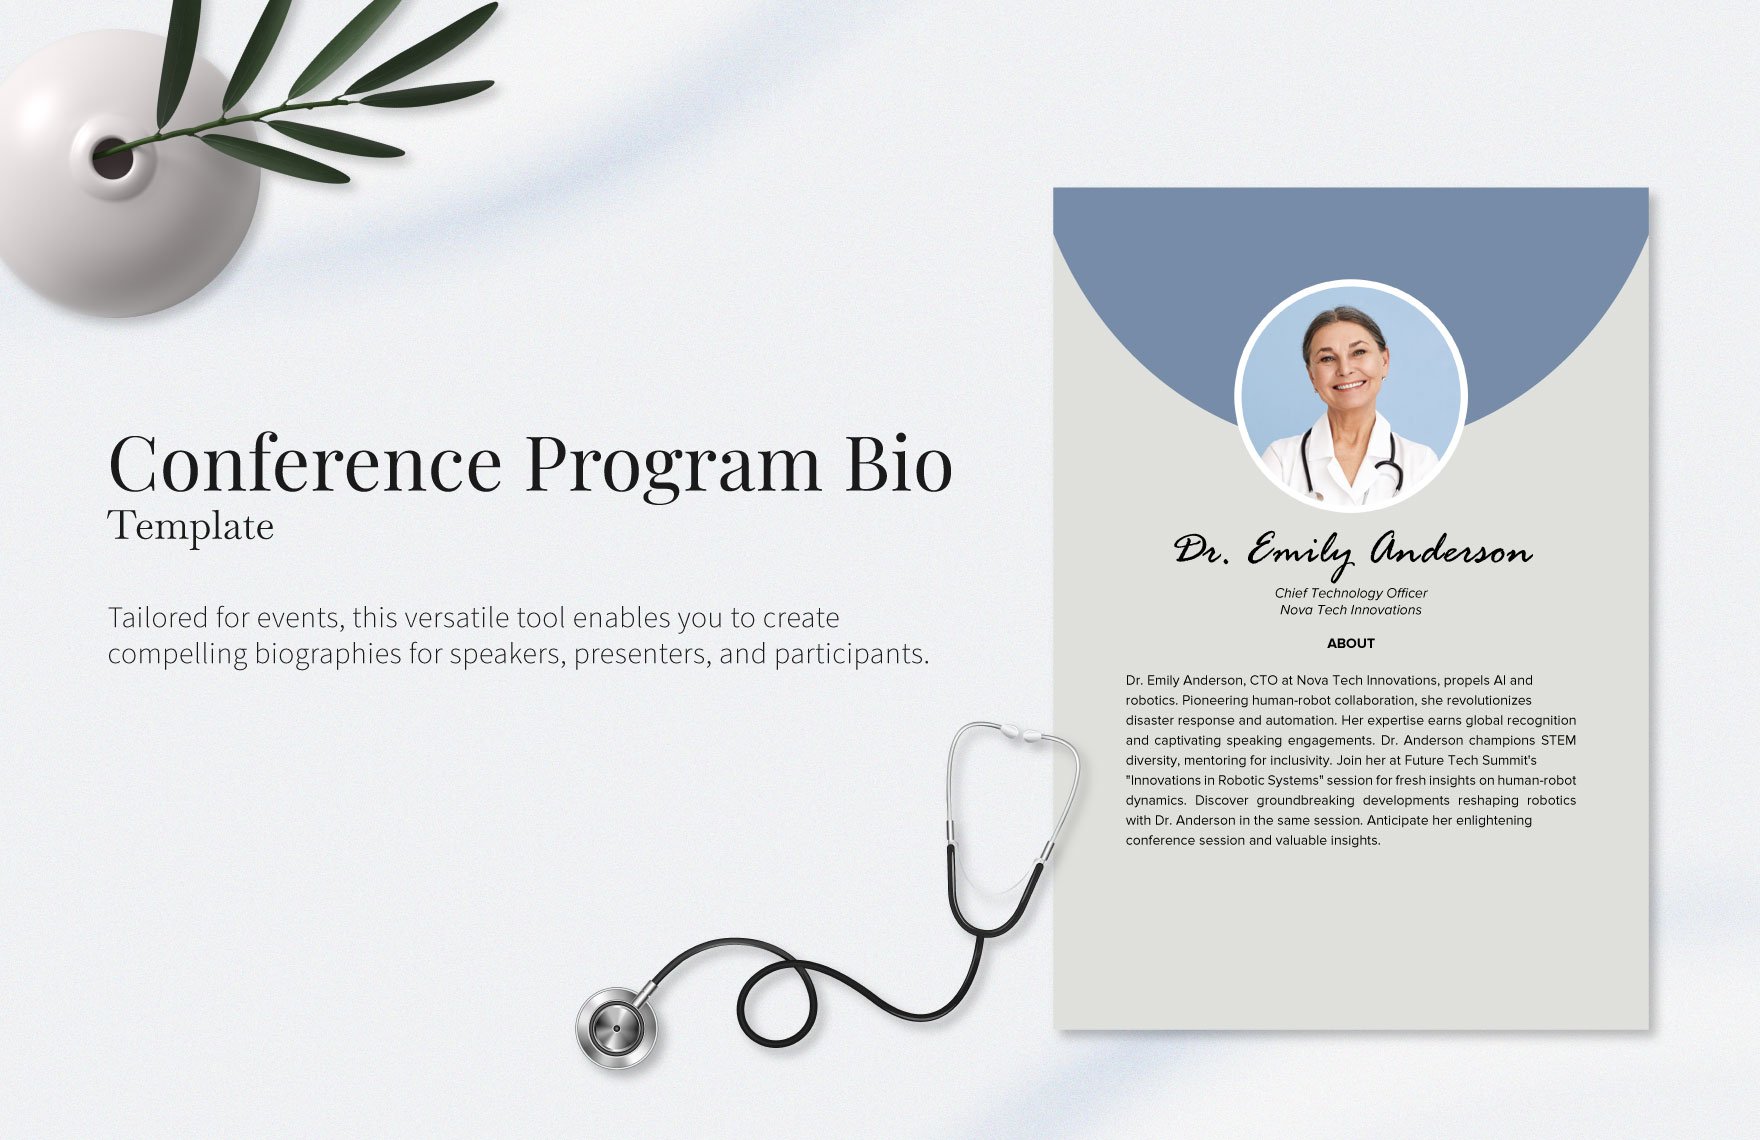 Conference Program Bio Template in Word, Illustrator, PSD, PNG